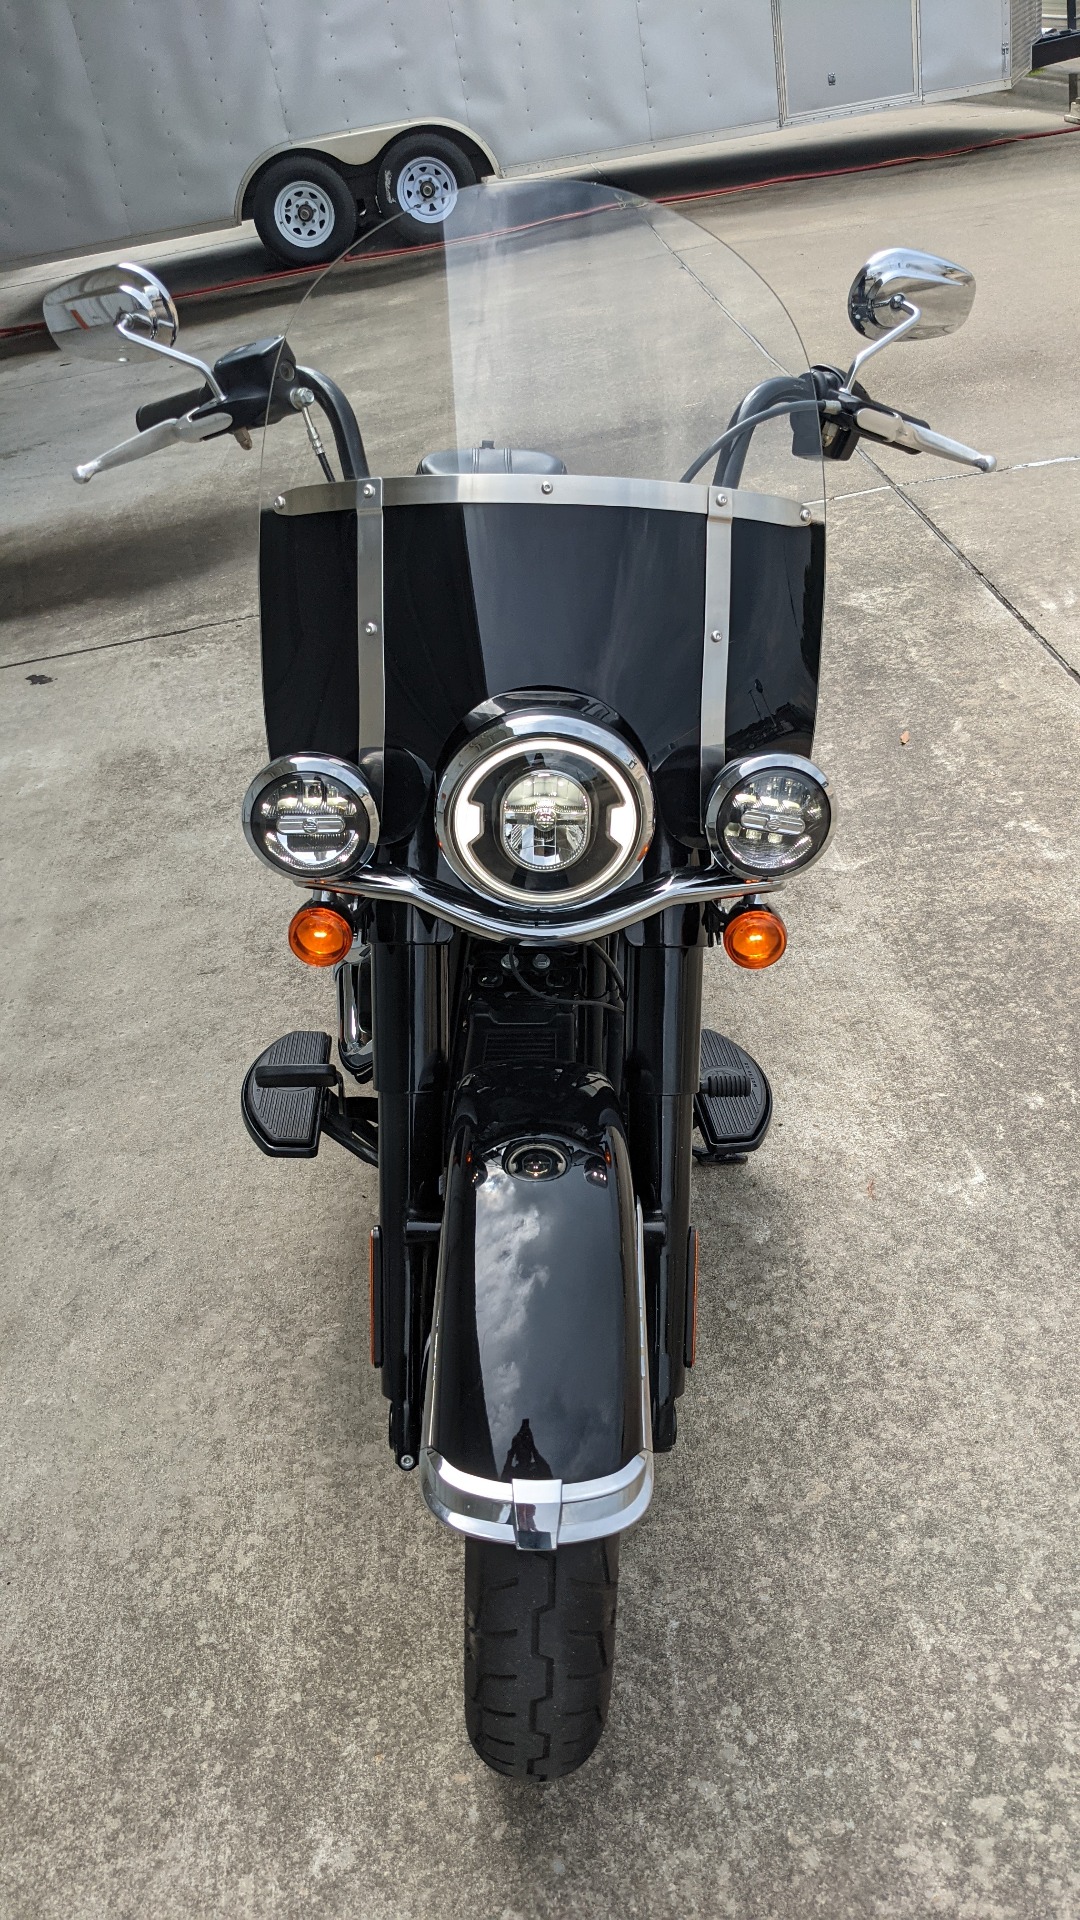 2019 Harley Heritage Classic 107 for sale - Photo 9